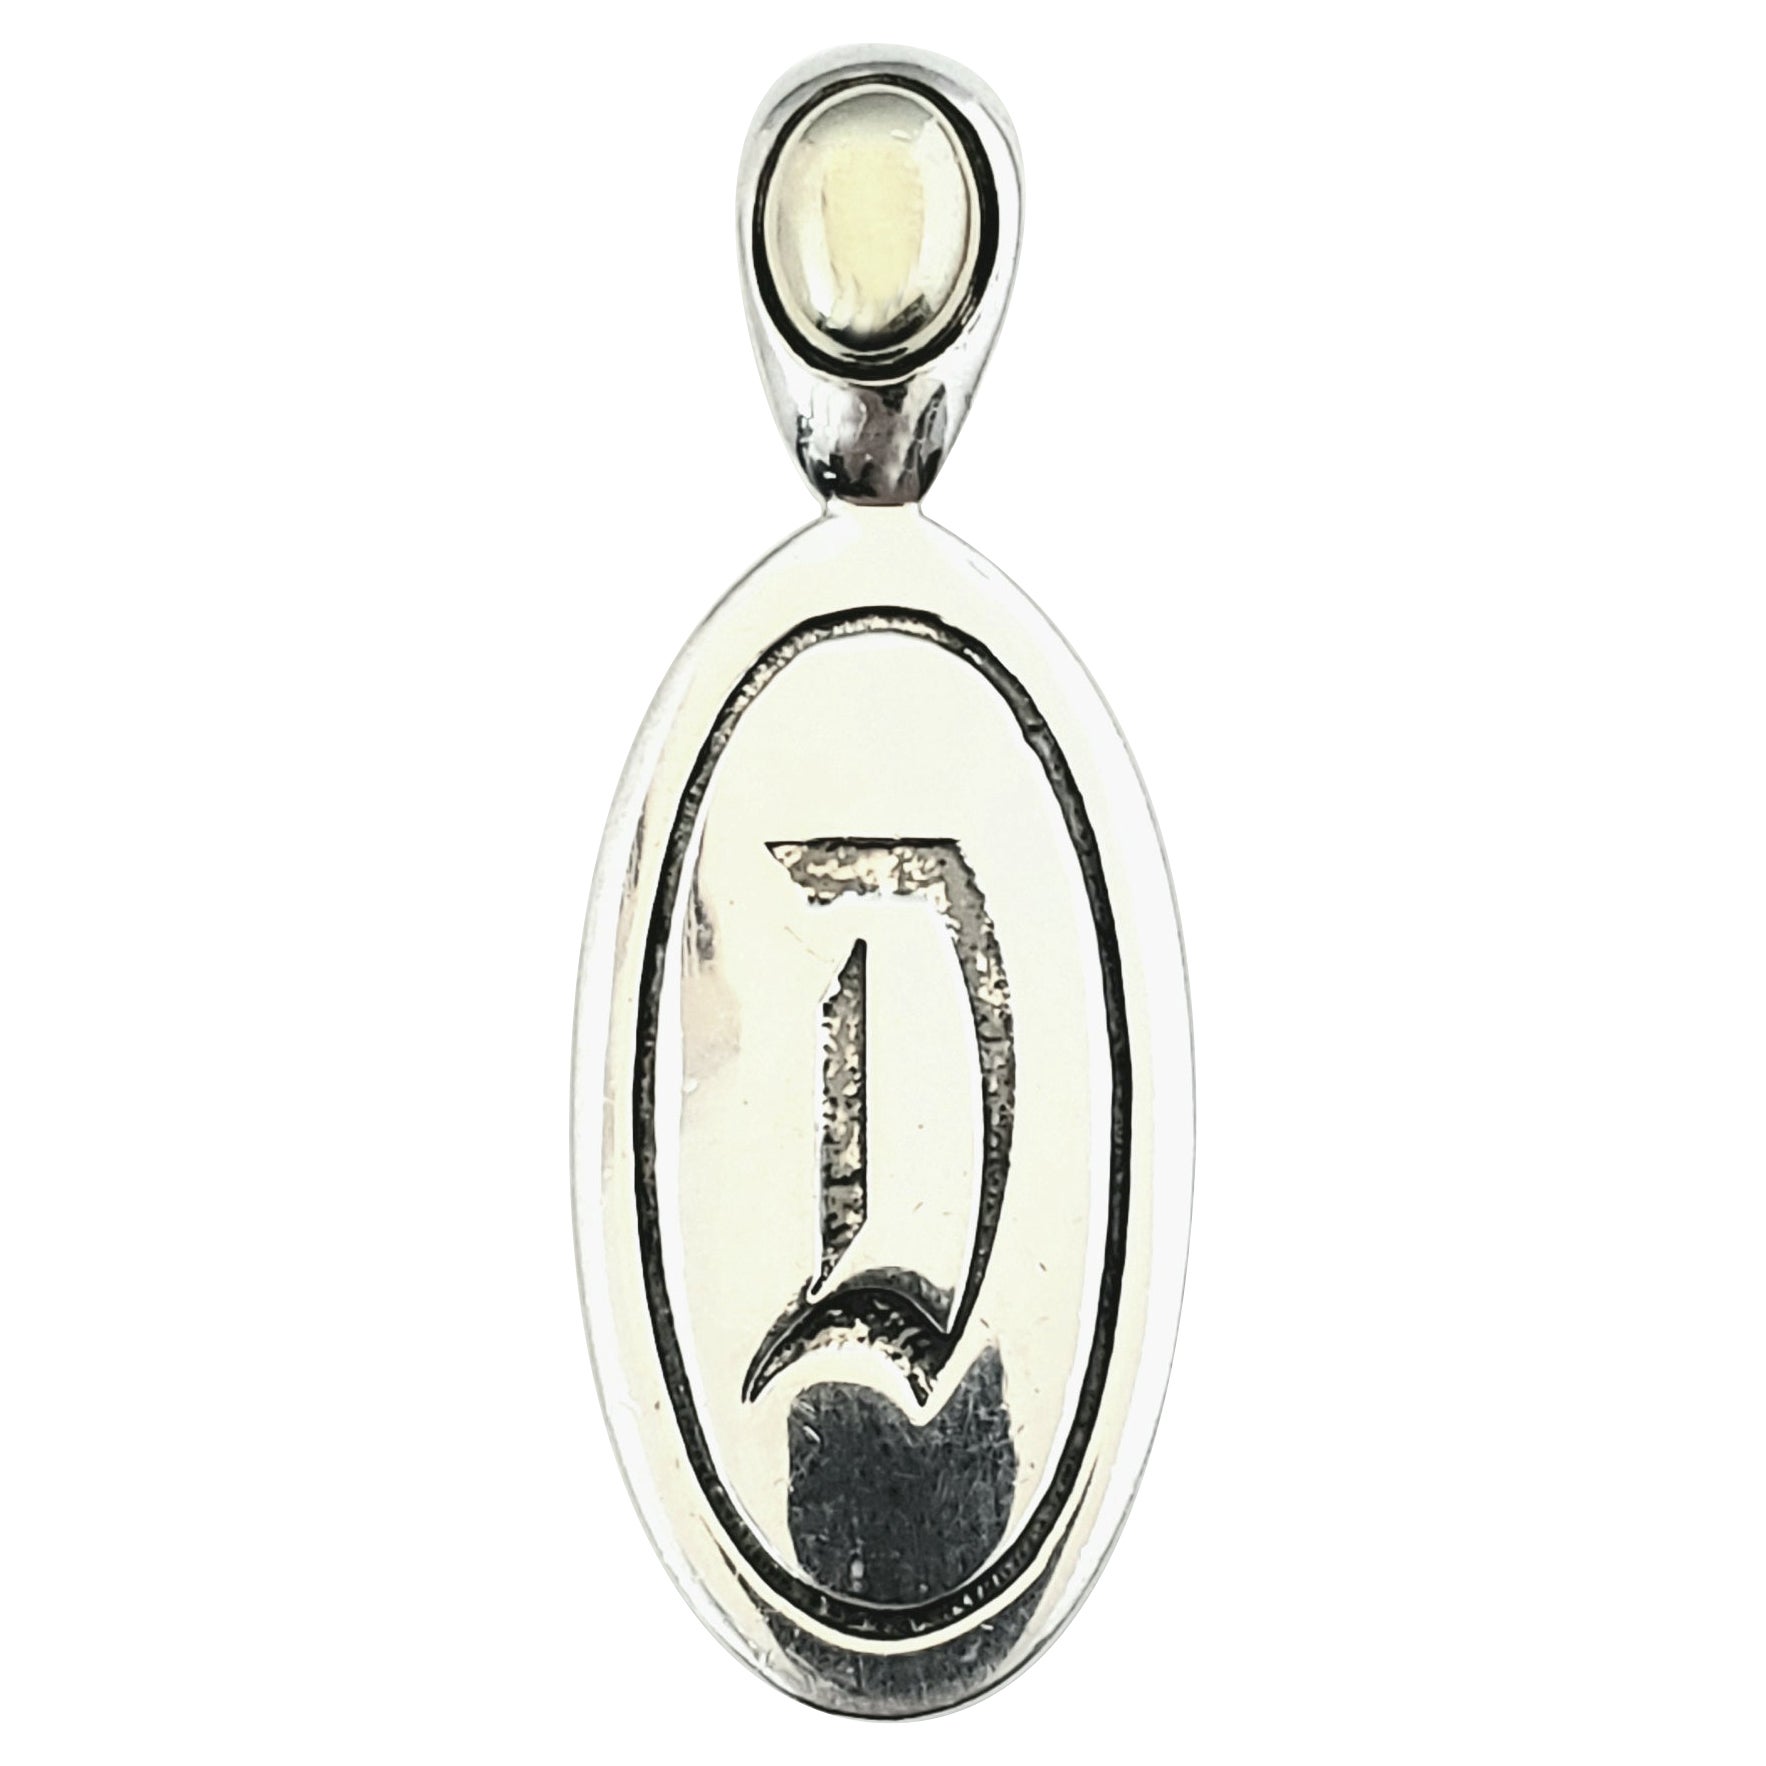 Lagos Beloved Large Lock Two-Tone Pendant Necklace Silver